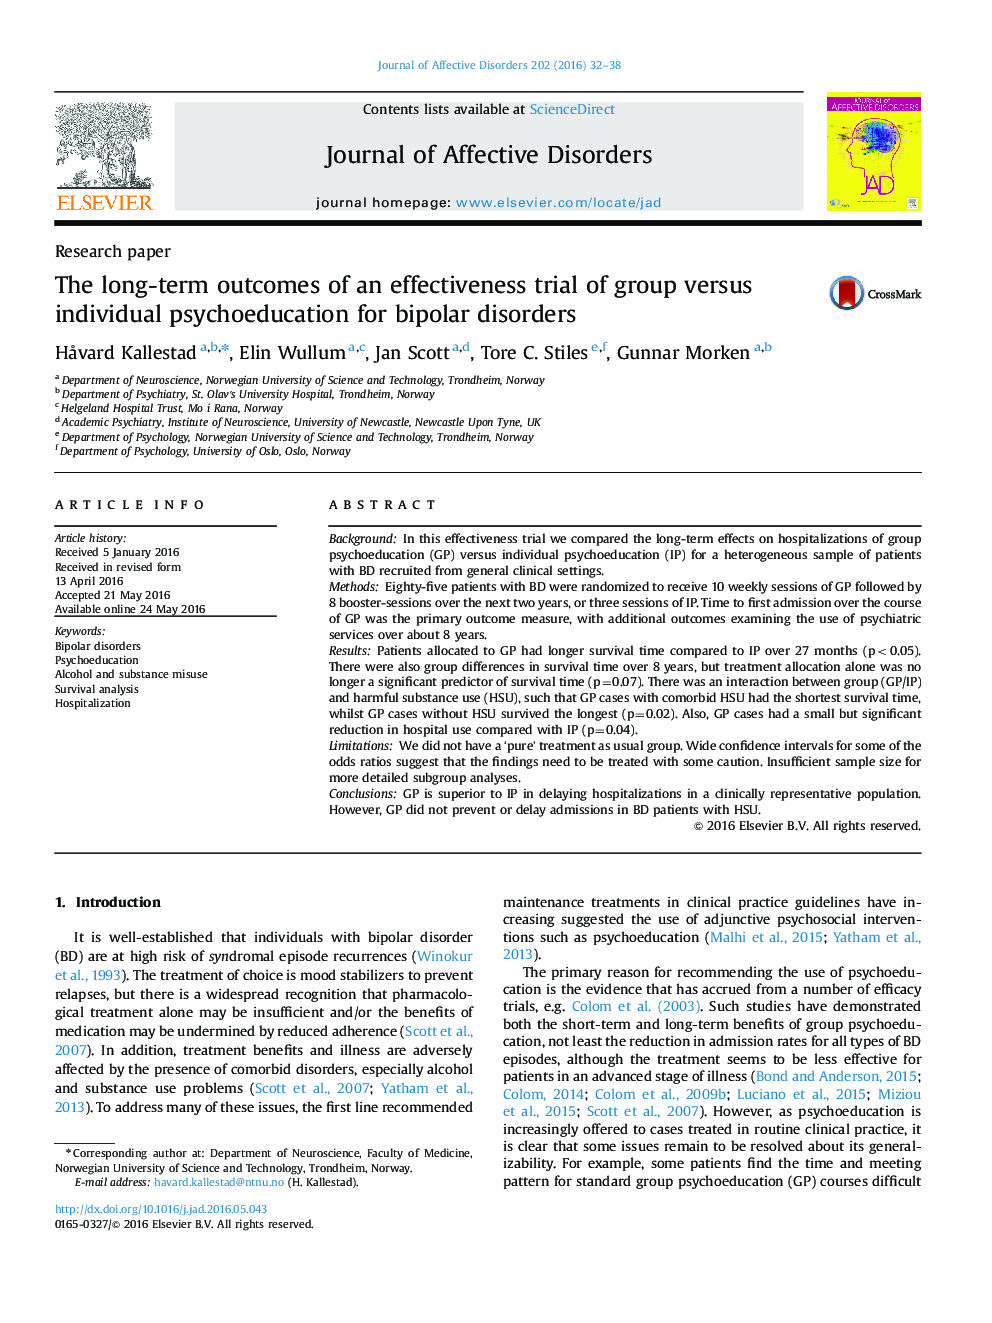 The long-term outcomes of an effectiveness trial of group versus individual psychoeducation for bipolar disorders